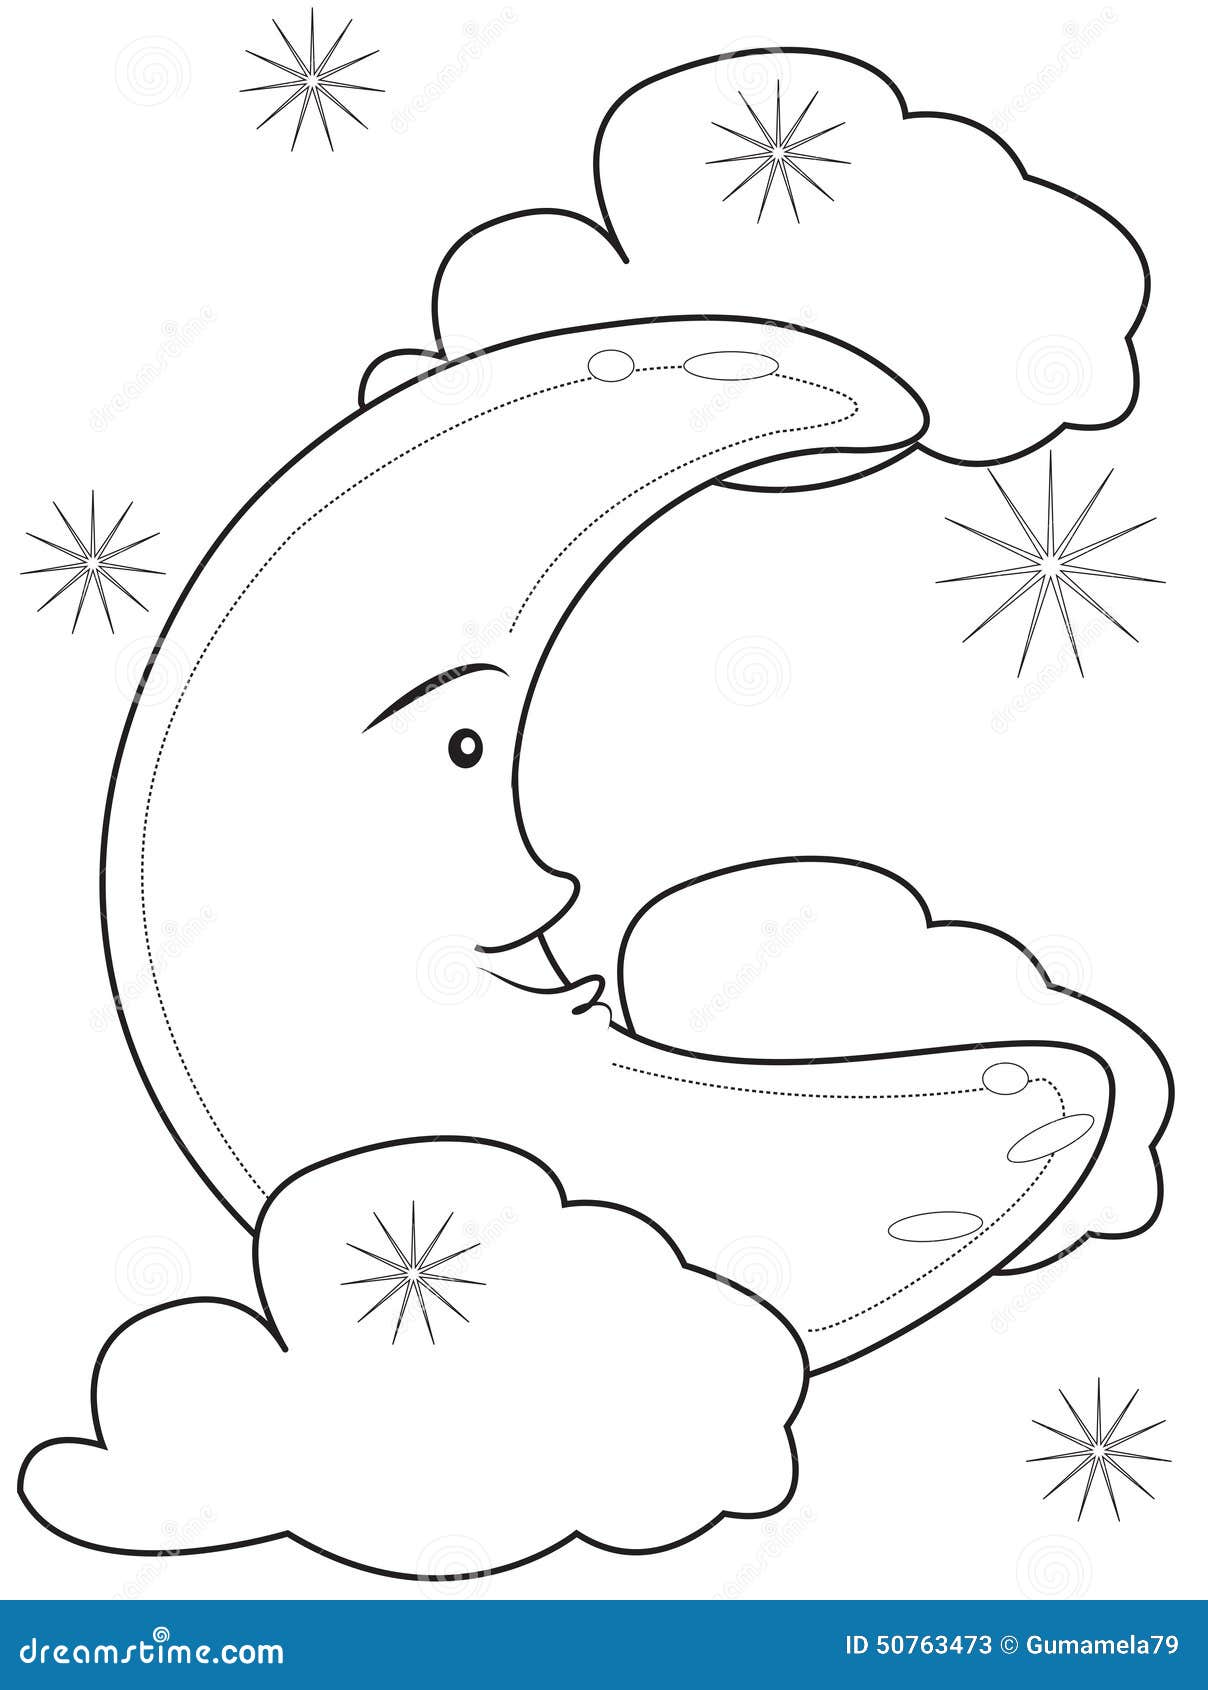 Moon Coloring Page Stock Illustration - Image: 50763473